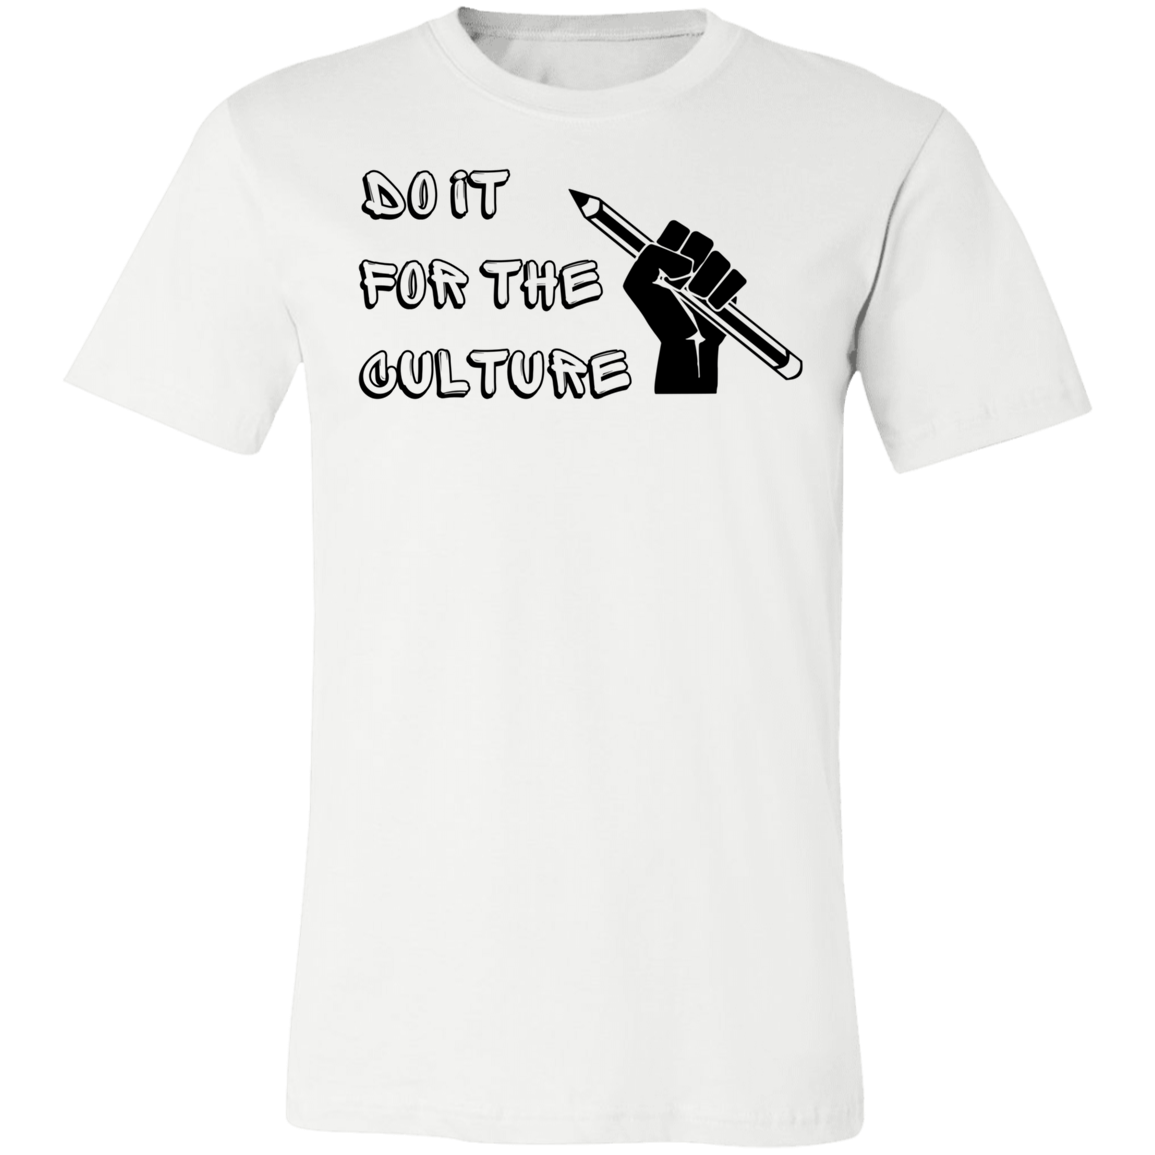 Do It For The Culture Unisex Short-Sleeve T-Shirt